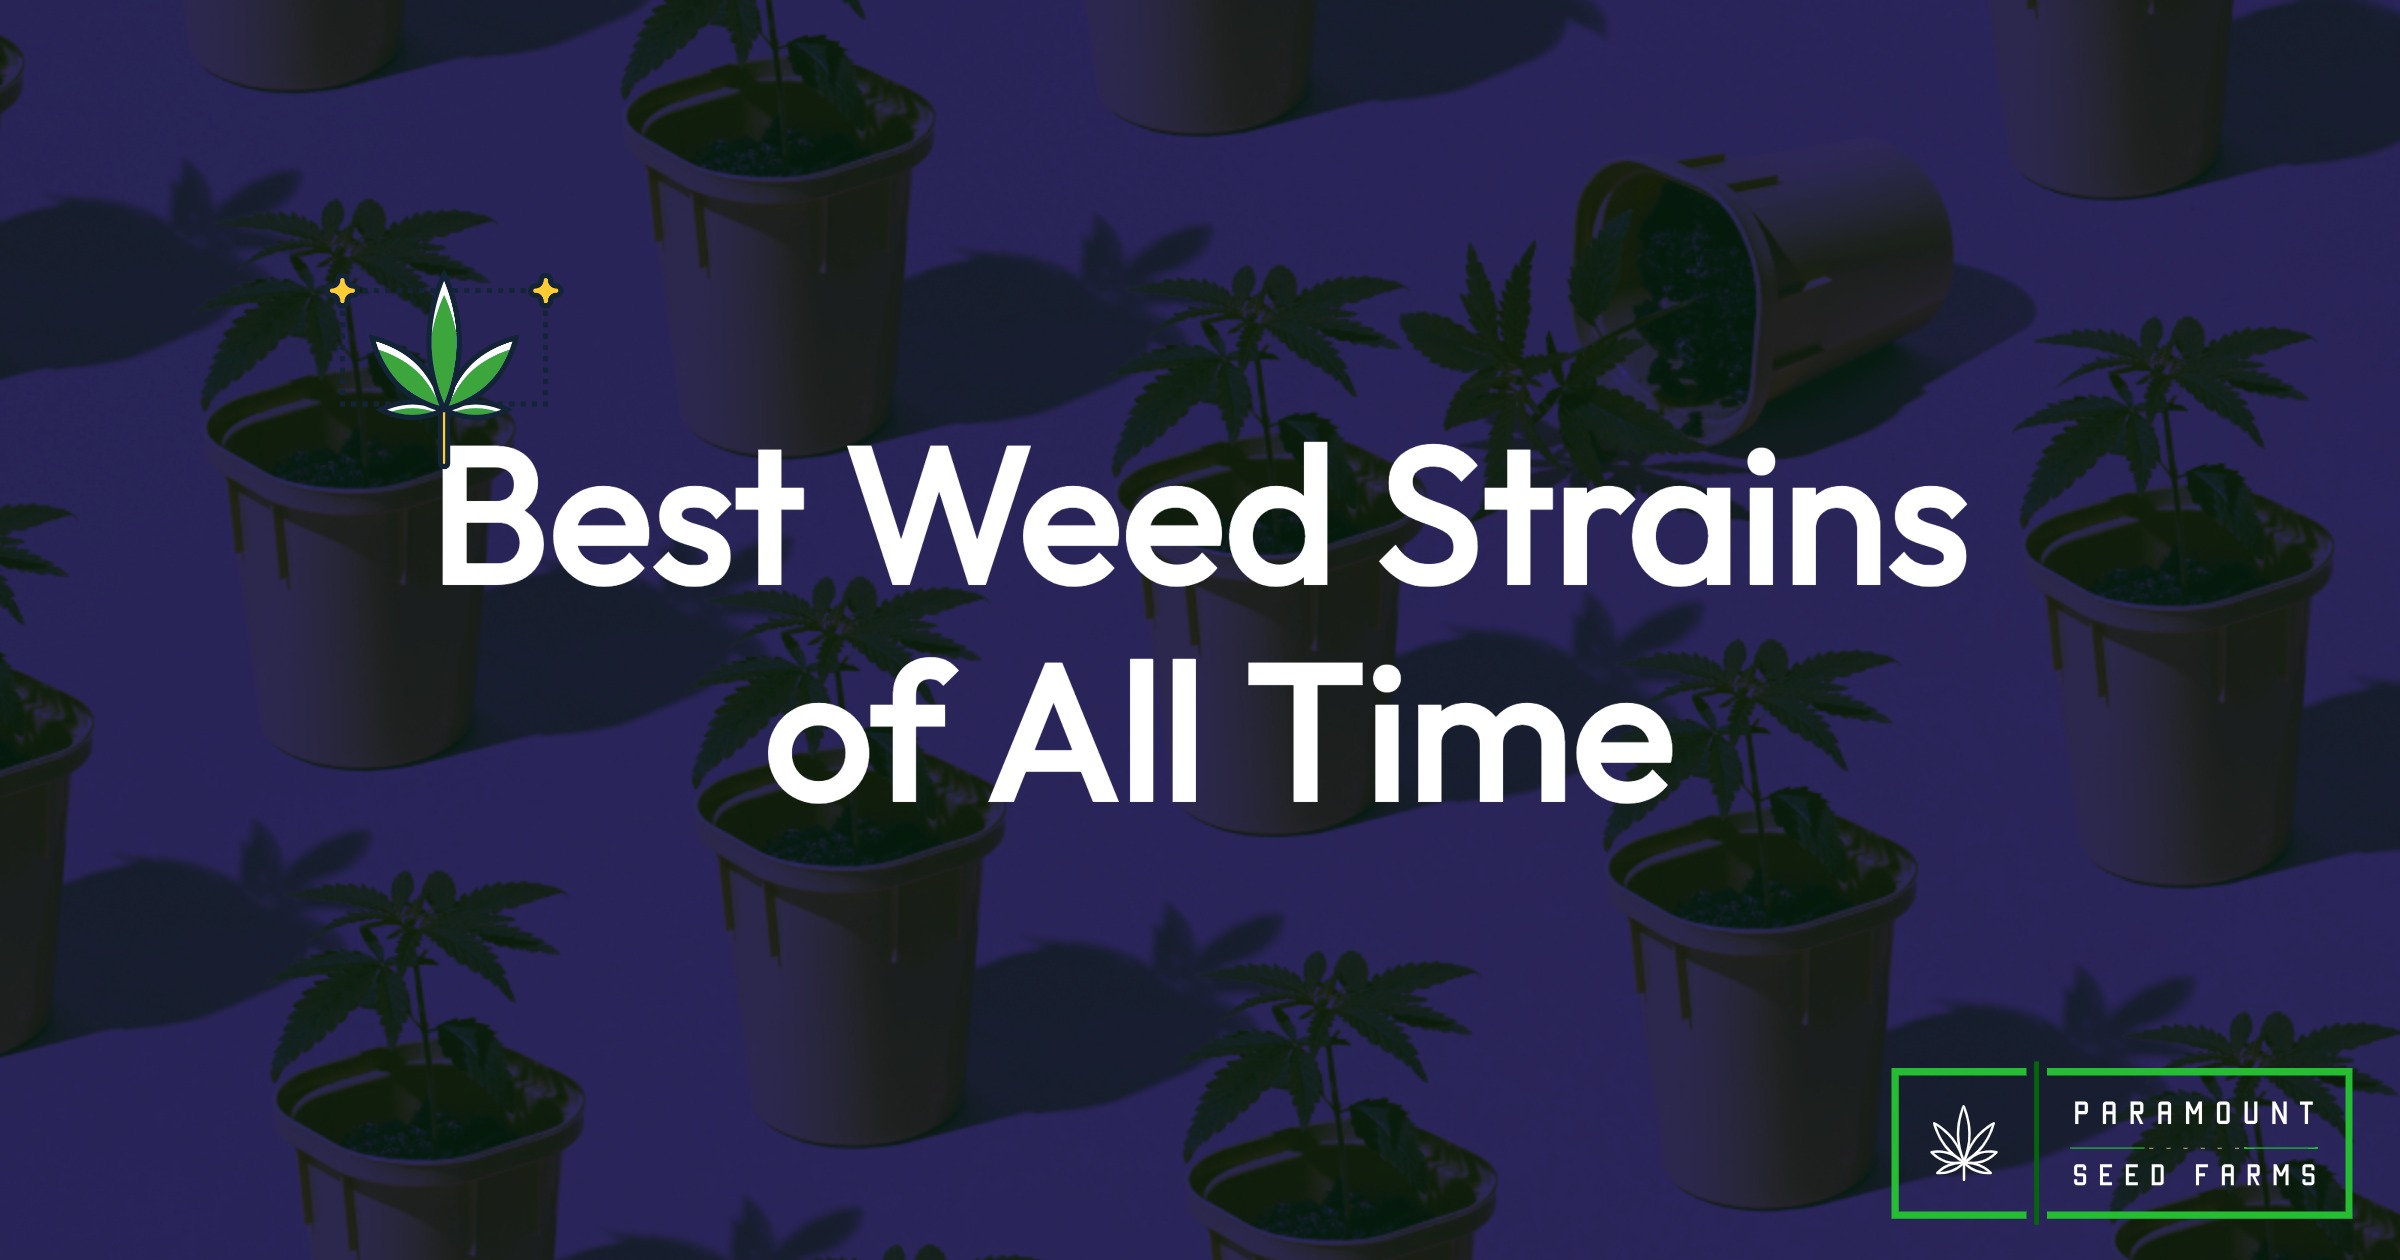 115 Best Weed Strains of All Time 1